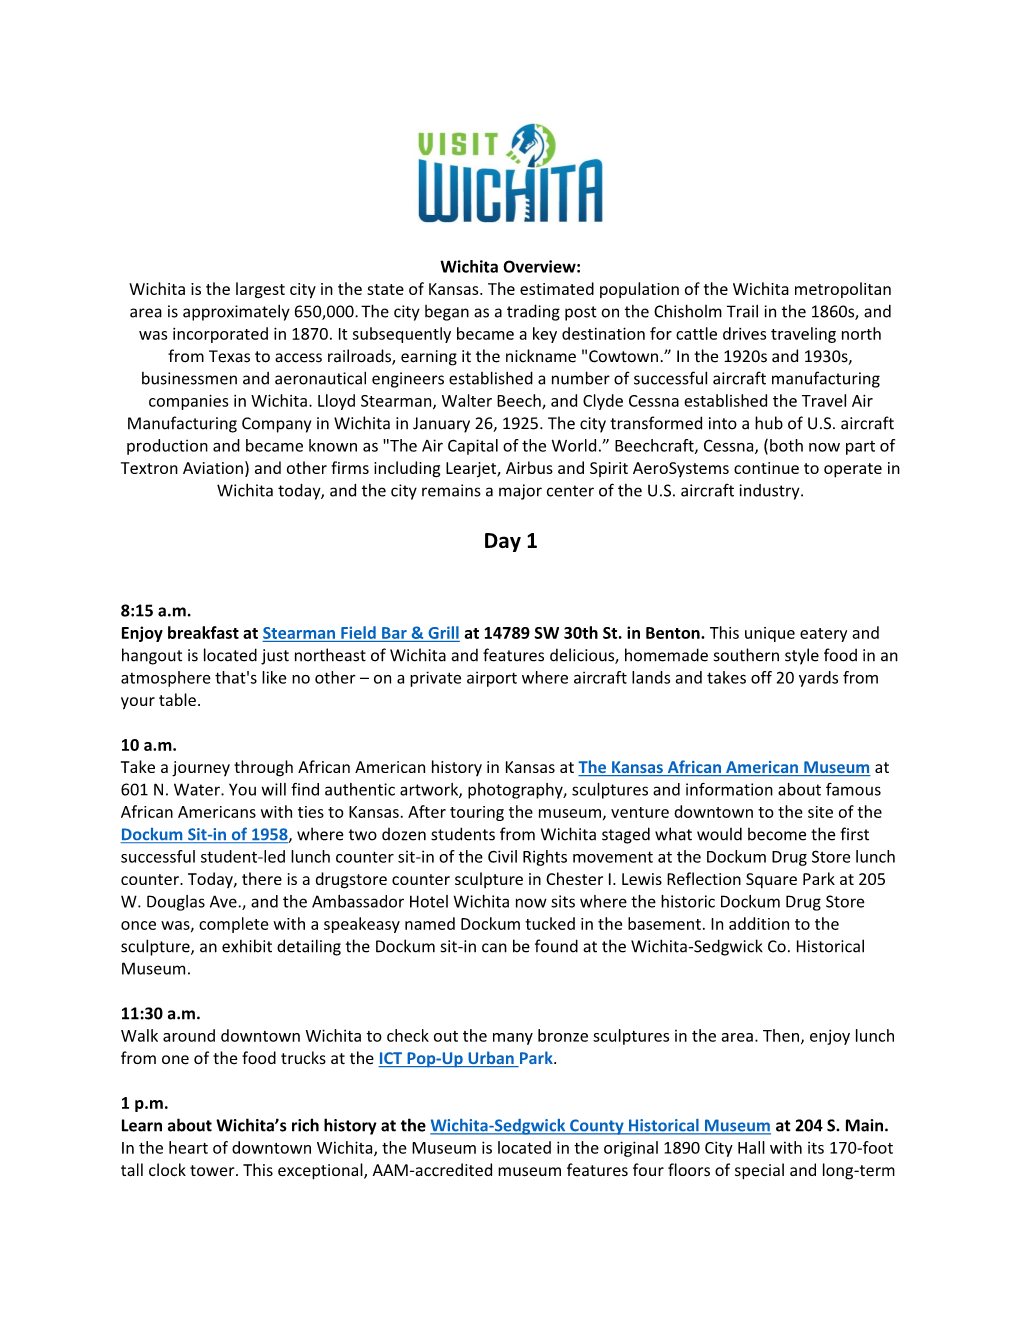 Wichita Overview: Wichita Is the Largest City in the State of Kansas